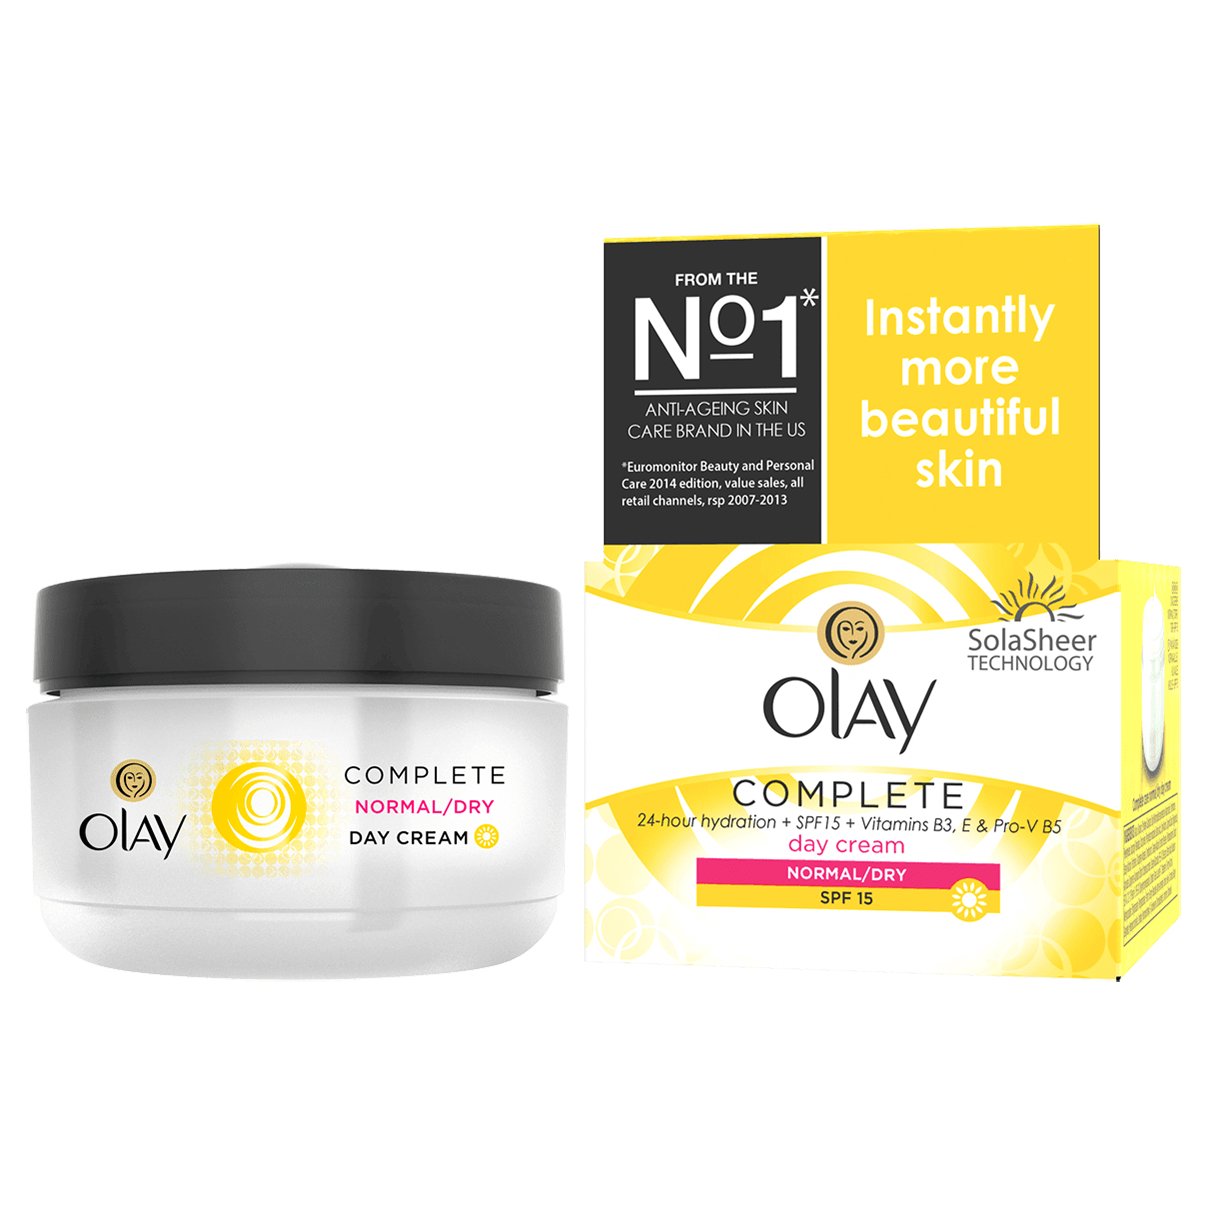 Olay Complete 3-in-1 Complete Care Normal Day Cream - 50ml